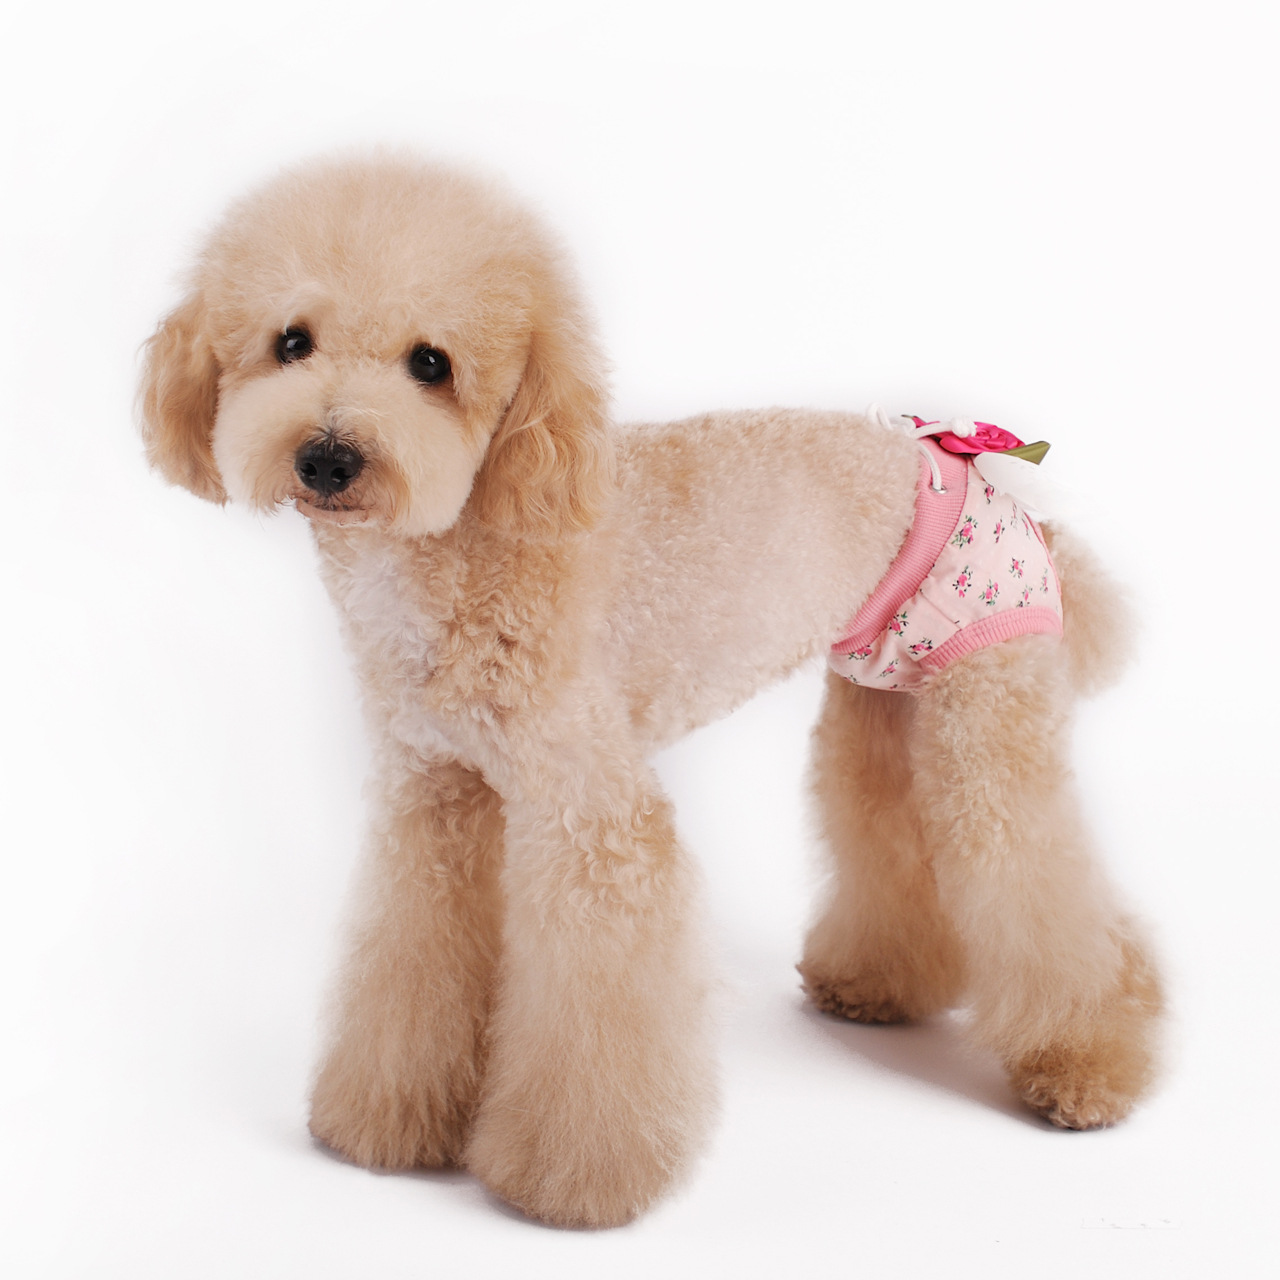 Pet Dog Puppy Female Sanitary Clothes Physiological Shorts Diaper Pink M